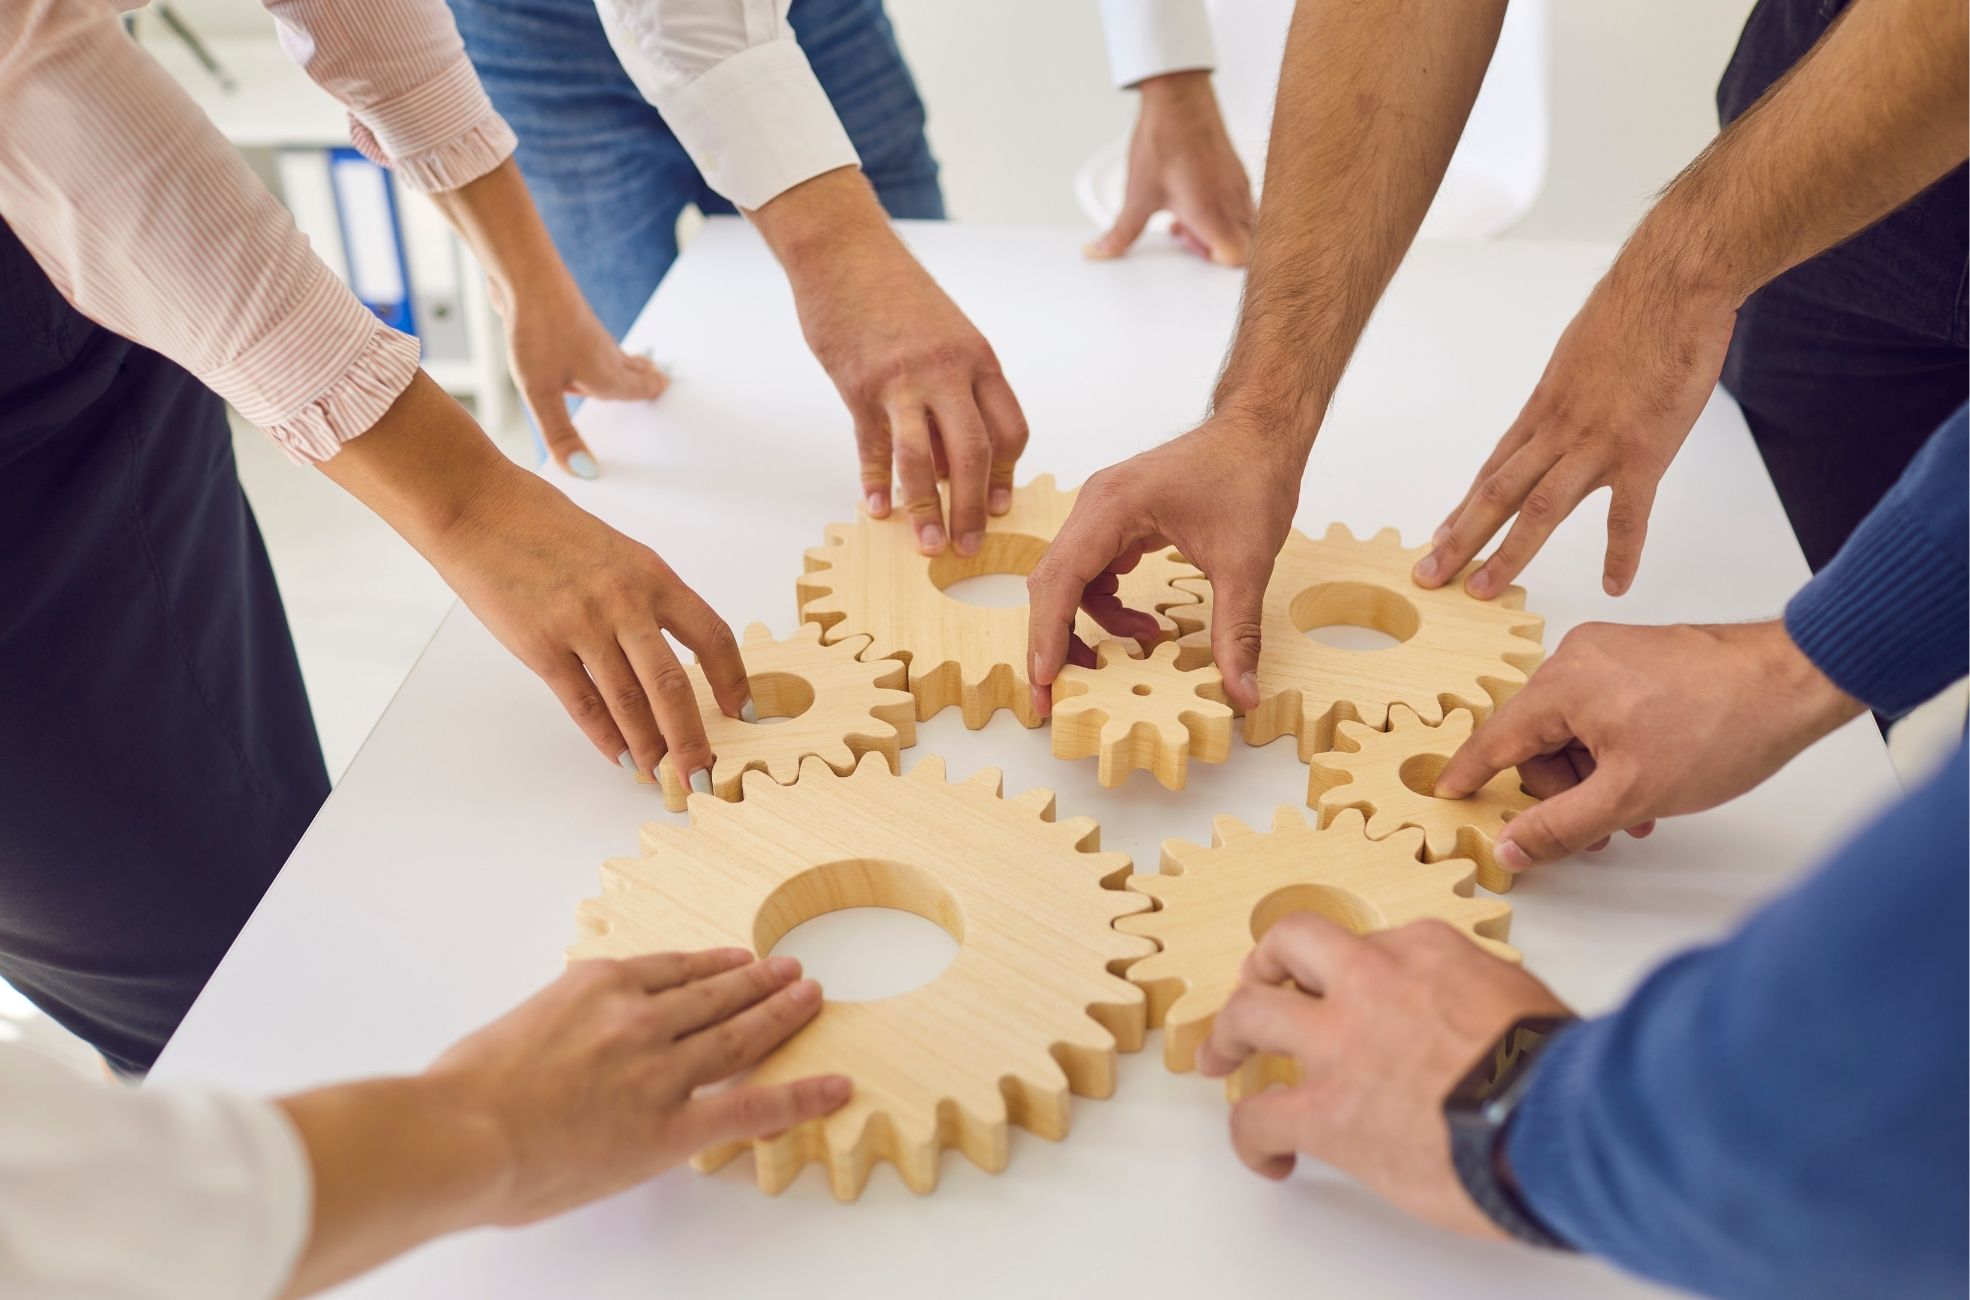 Team Building Hands And Wooden Cogs